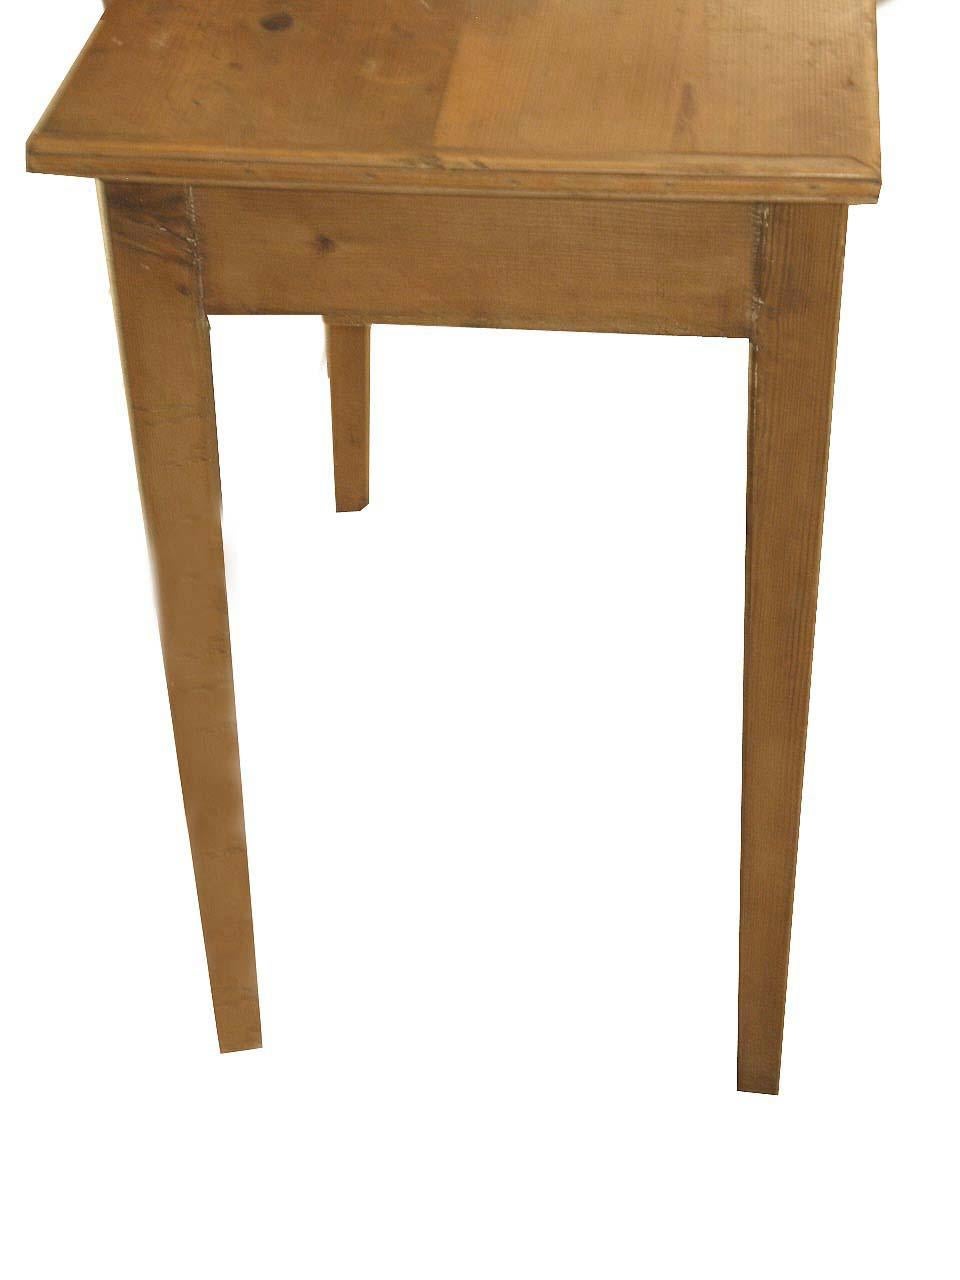 English pine one drawer table, this table has what is commonly referred to in the trade as a ''stripped pine'' finish which is simply beeswax and then rubbed down. The drawer has swan neck pulls which, although are not original, are handmade